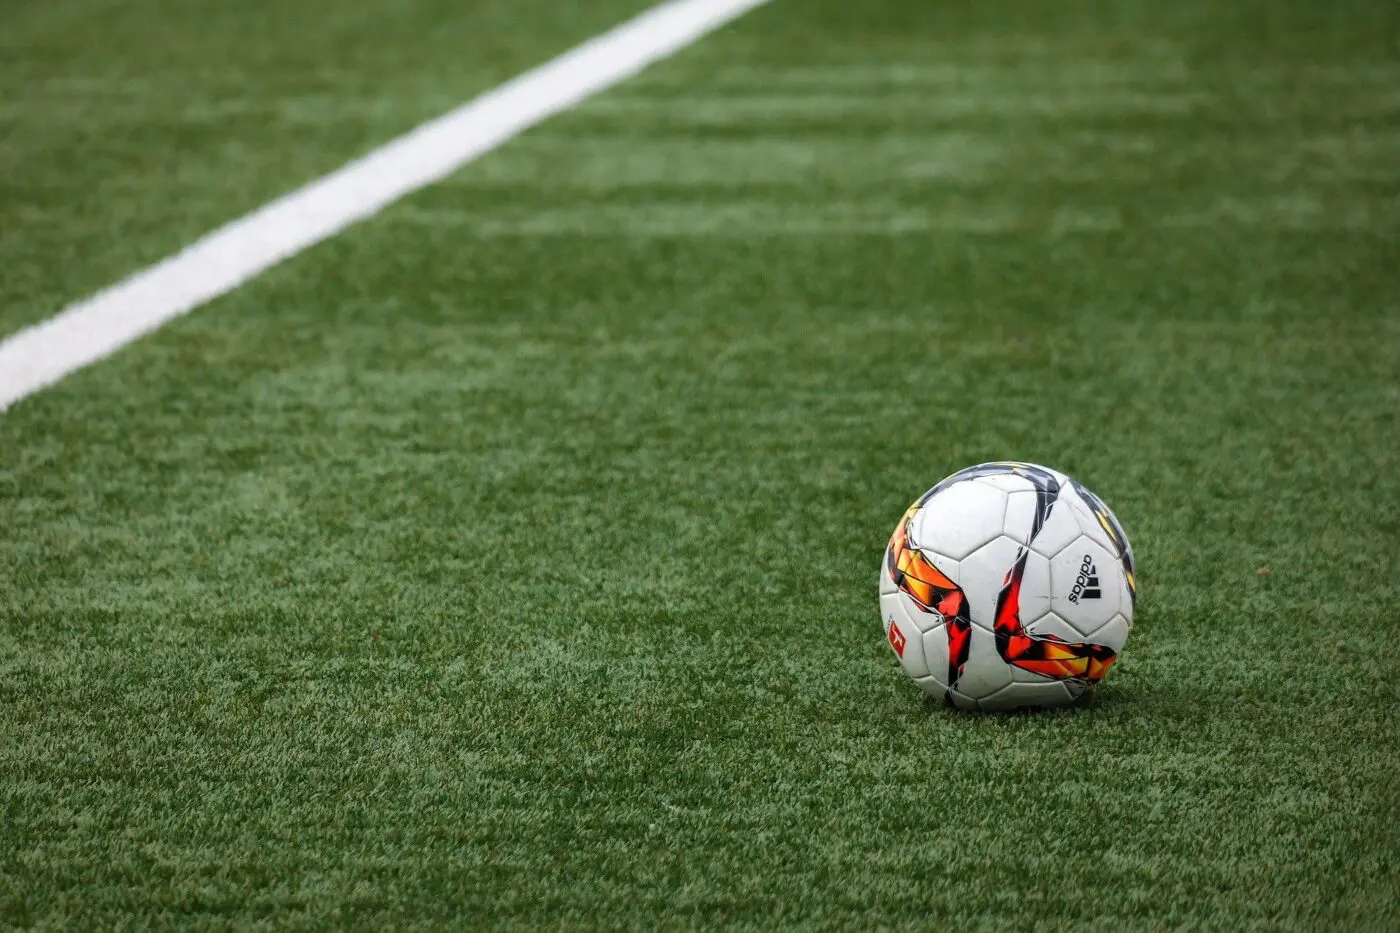 A soccer ball with a white base and a red, yellow, and black design rests on the green artificial turf of one of our premium playing fields near a white boundary line.